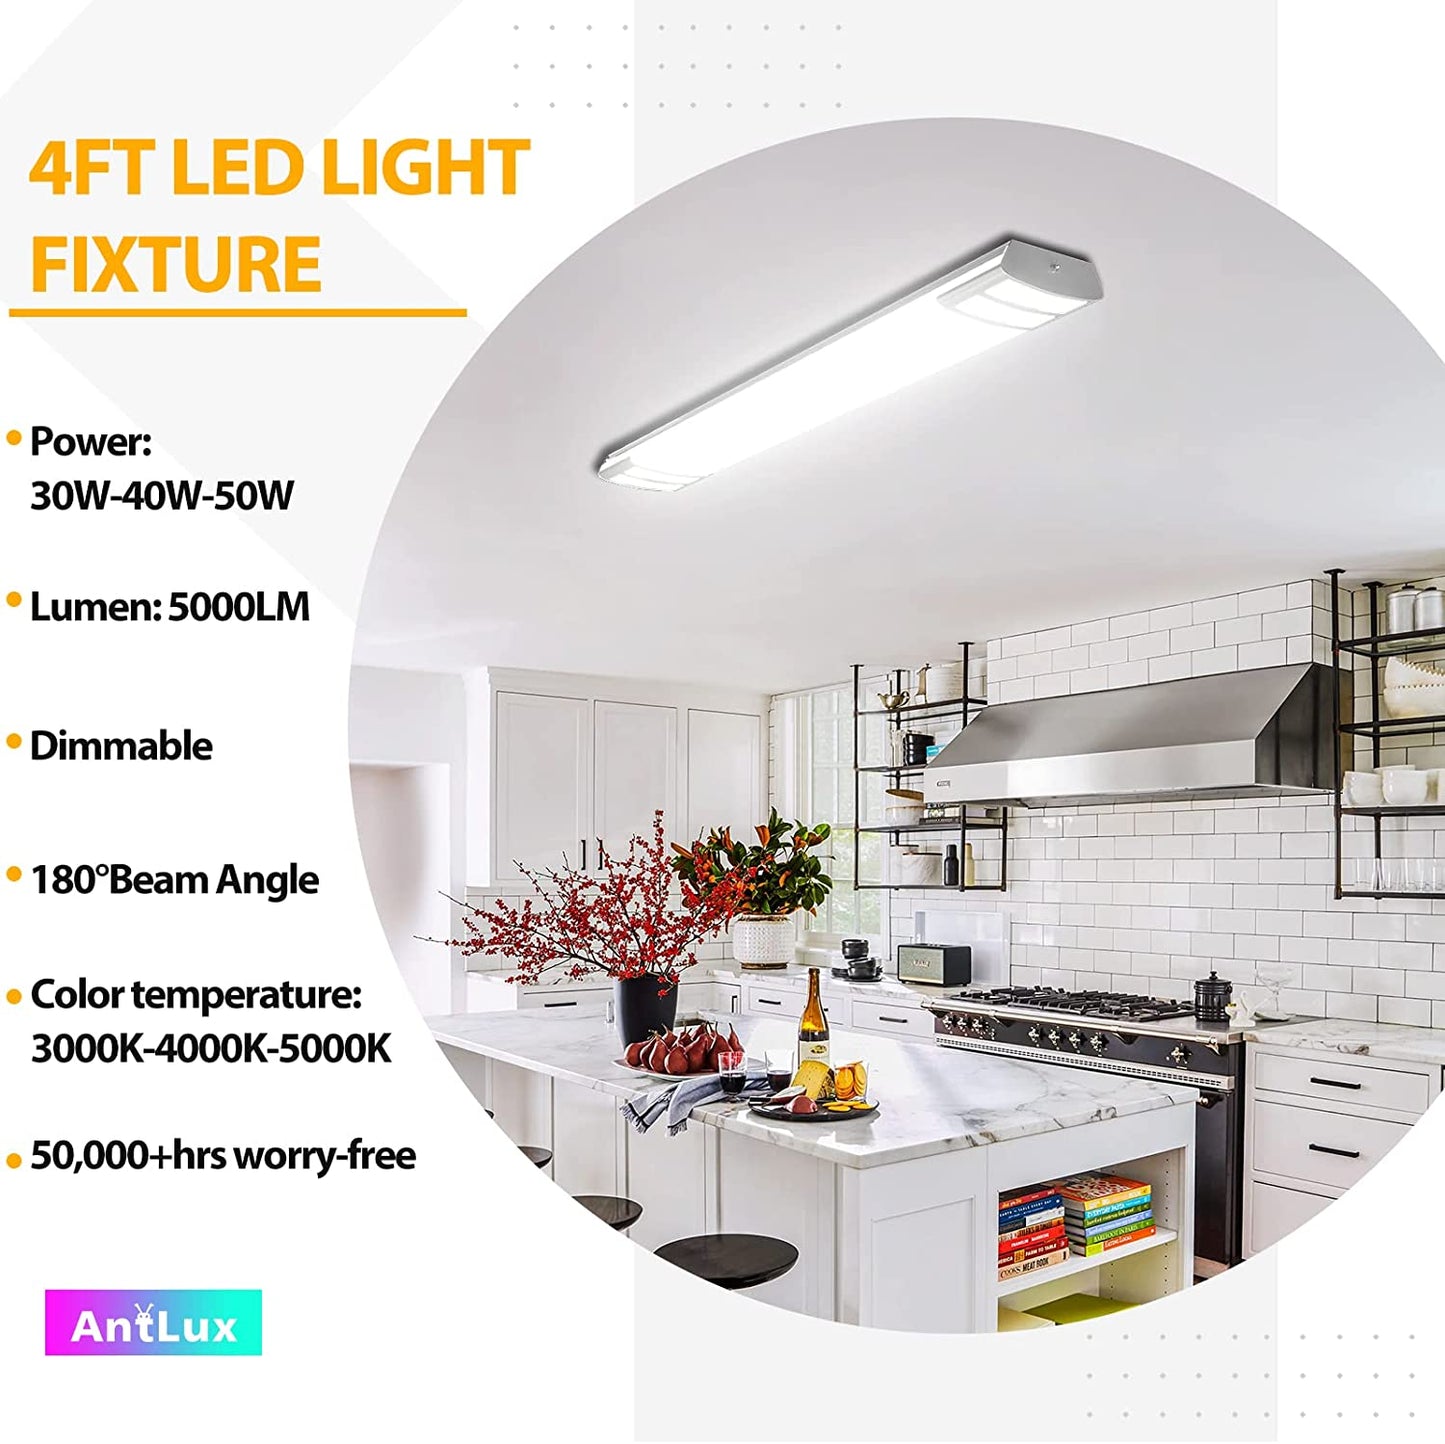 ANTLUX 4FT LED Light Fixtures, 3000K 4000K 5000K Selectable, 30W/40W/50W Dimmable 4 Foot LED Kitchen Ceiling Light Fixture, 48 Inch Flush Mount LED Wraparound Puff Lights for Kitchen, Laundry, Office, 4 Pack